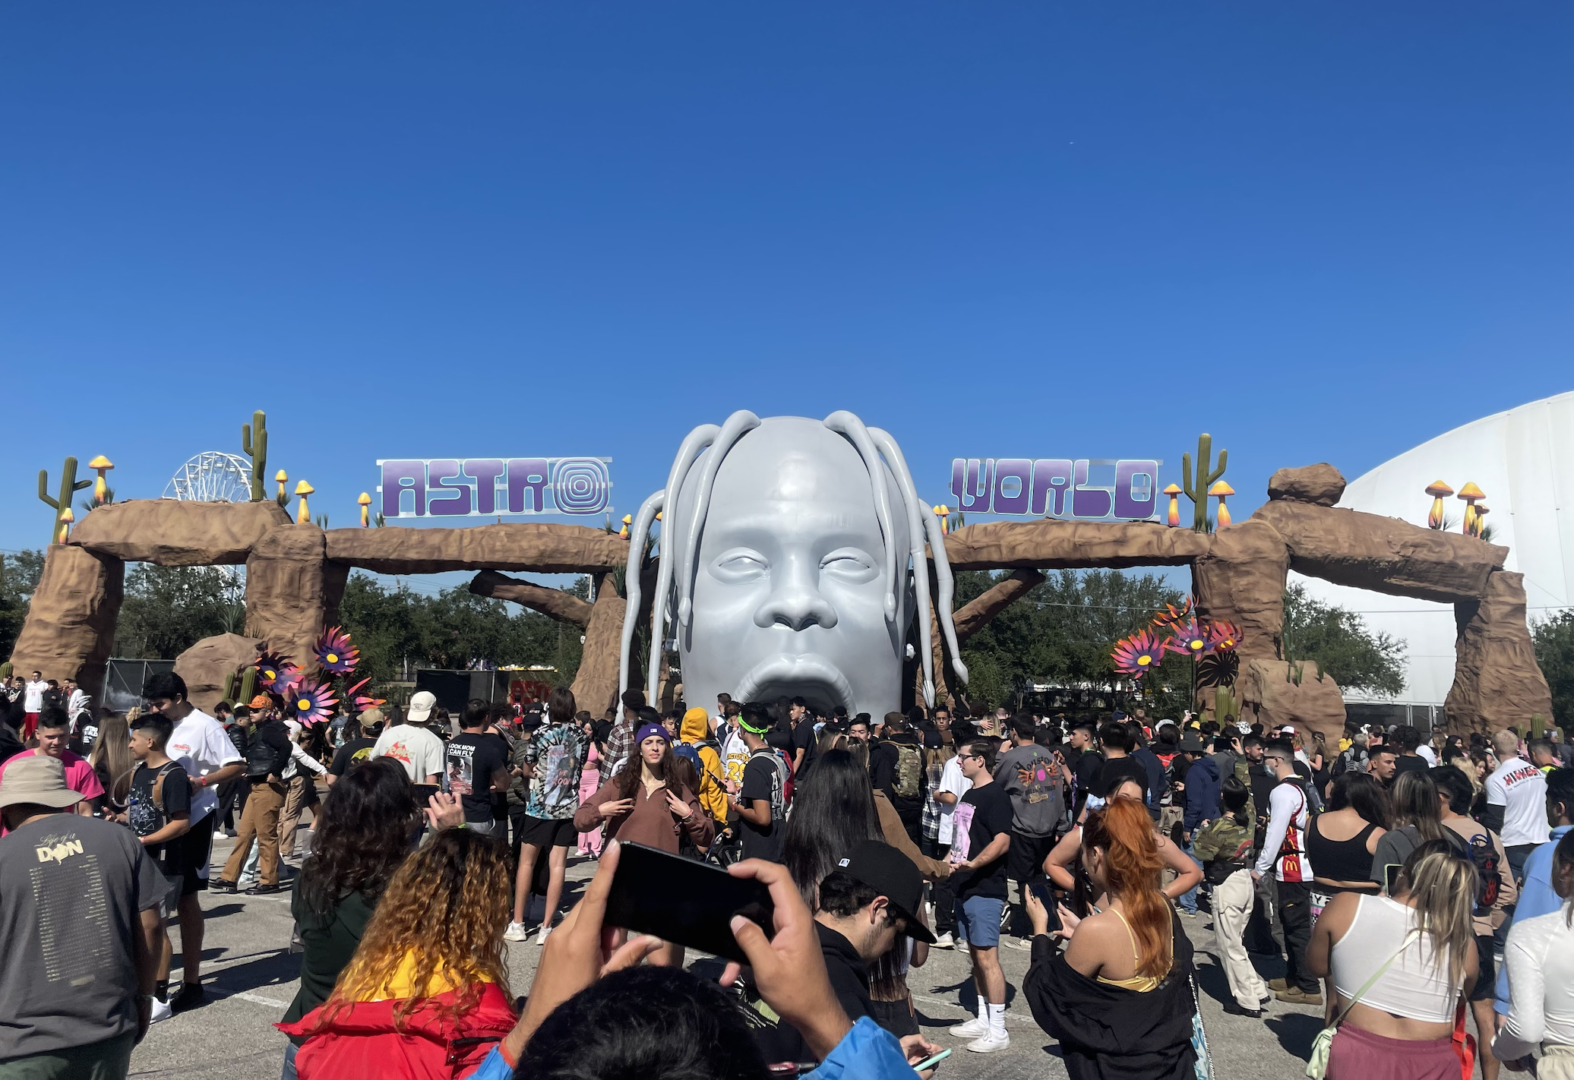 Plaintiffs filing lawsuits against parties involved with organizing Astroworld are exceeding 200 nearly two weeks after a deadly crowd surge killed 10 attendees. | Jhair Romero/The Cougar